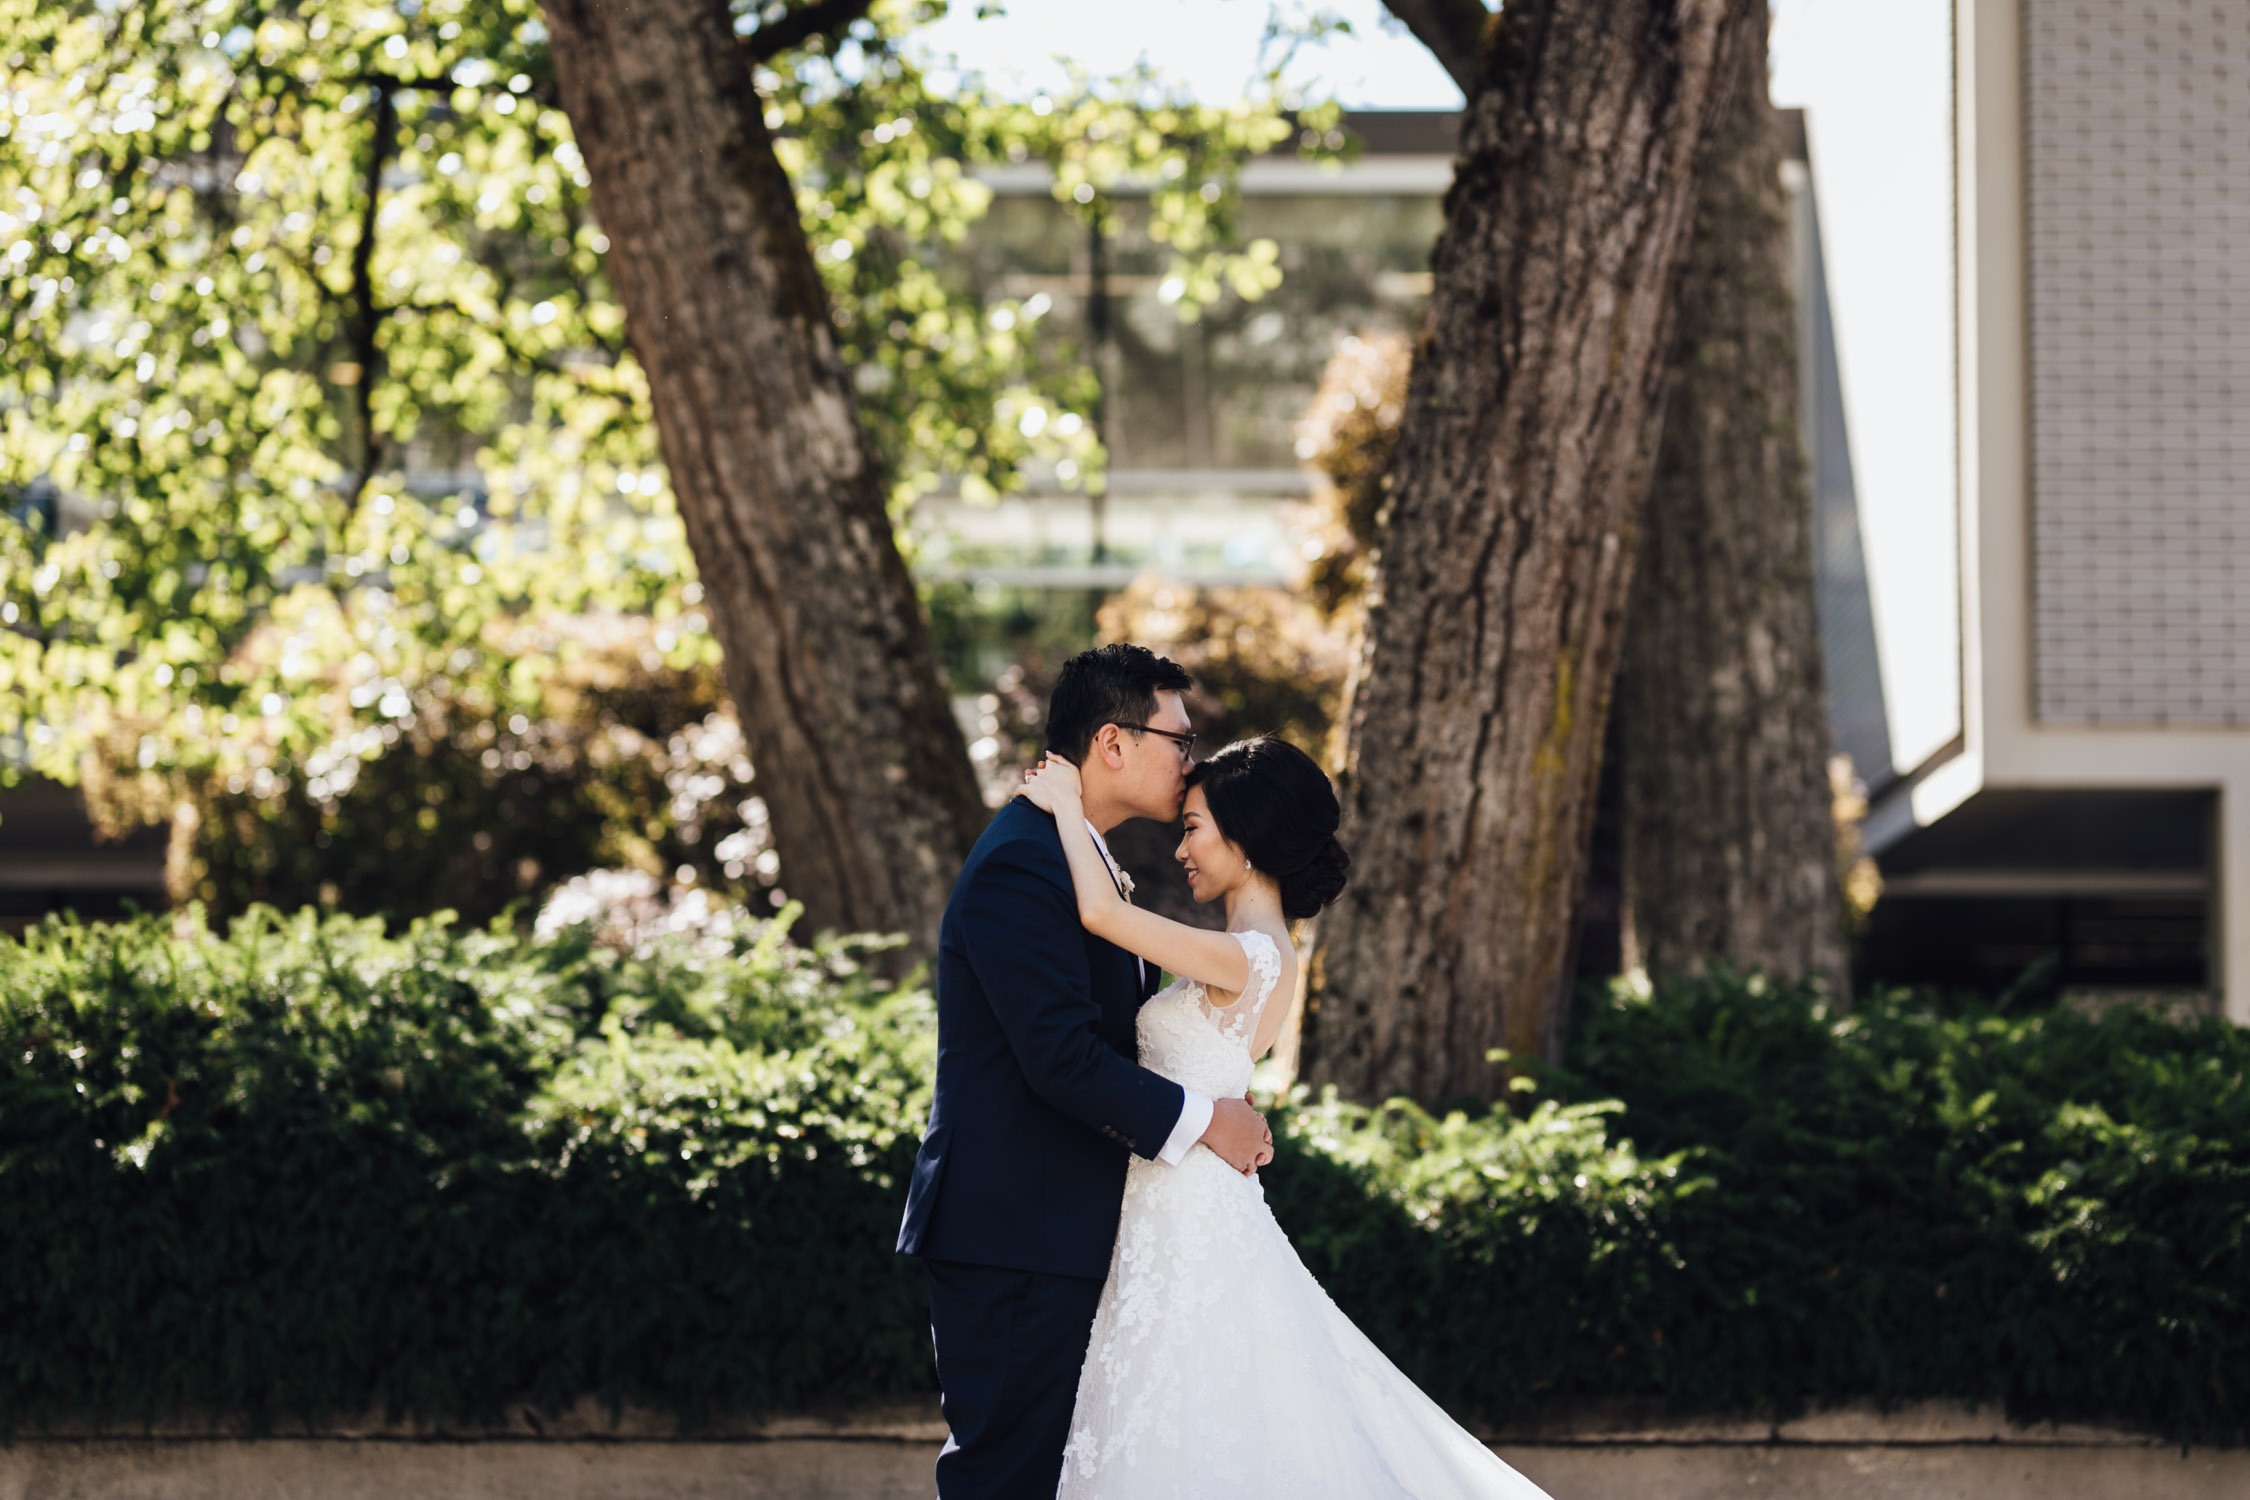 ubc wedding photography portraits of bride and groom during summer